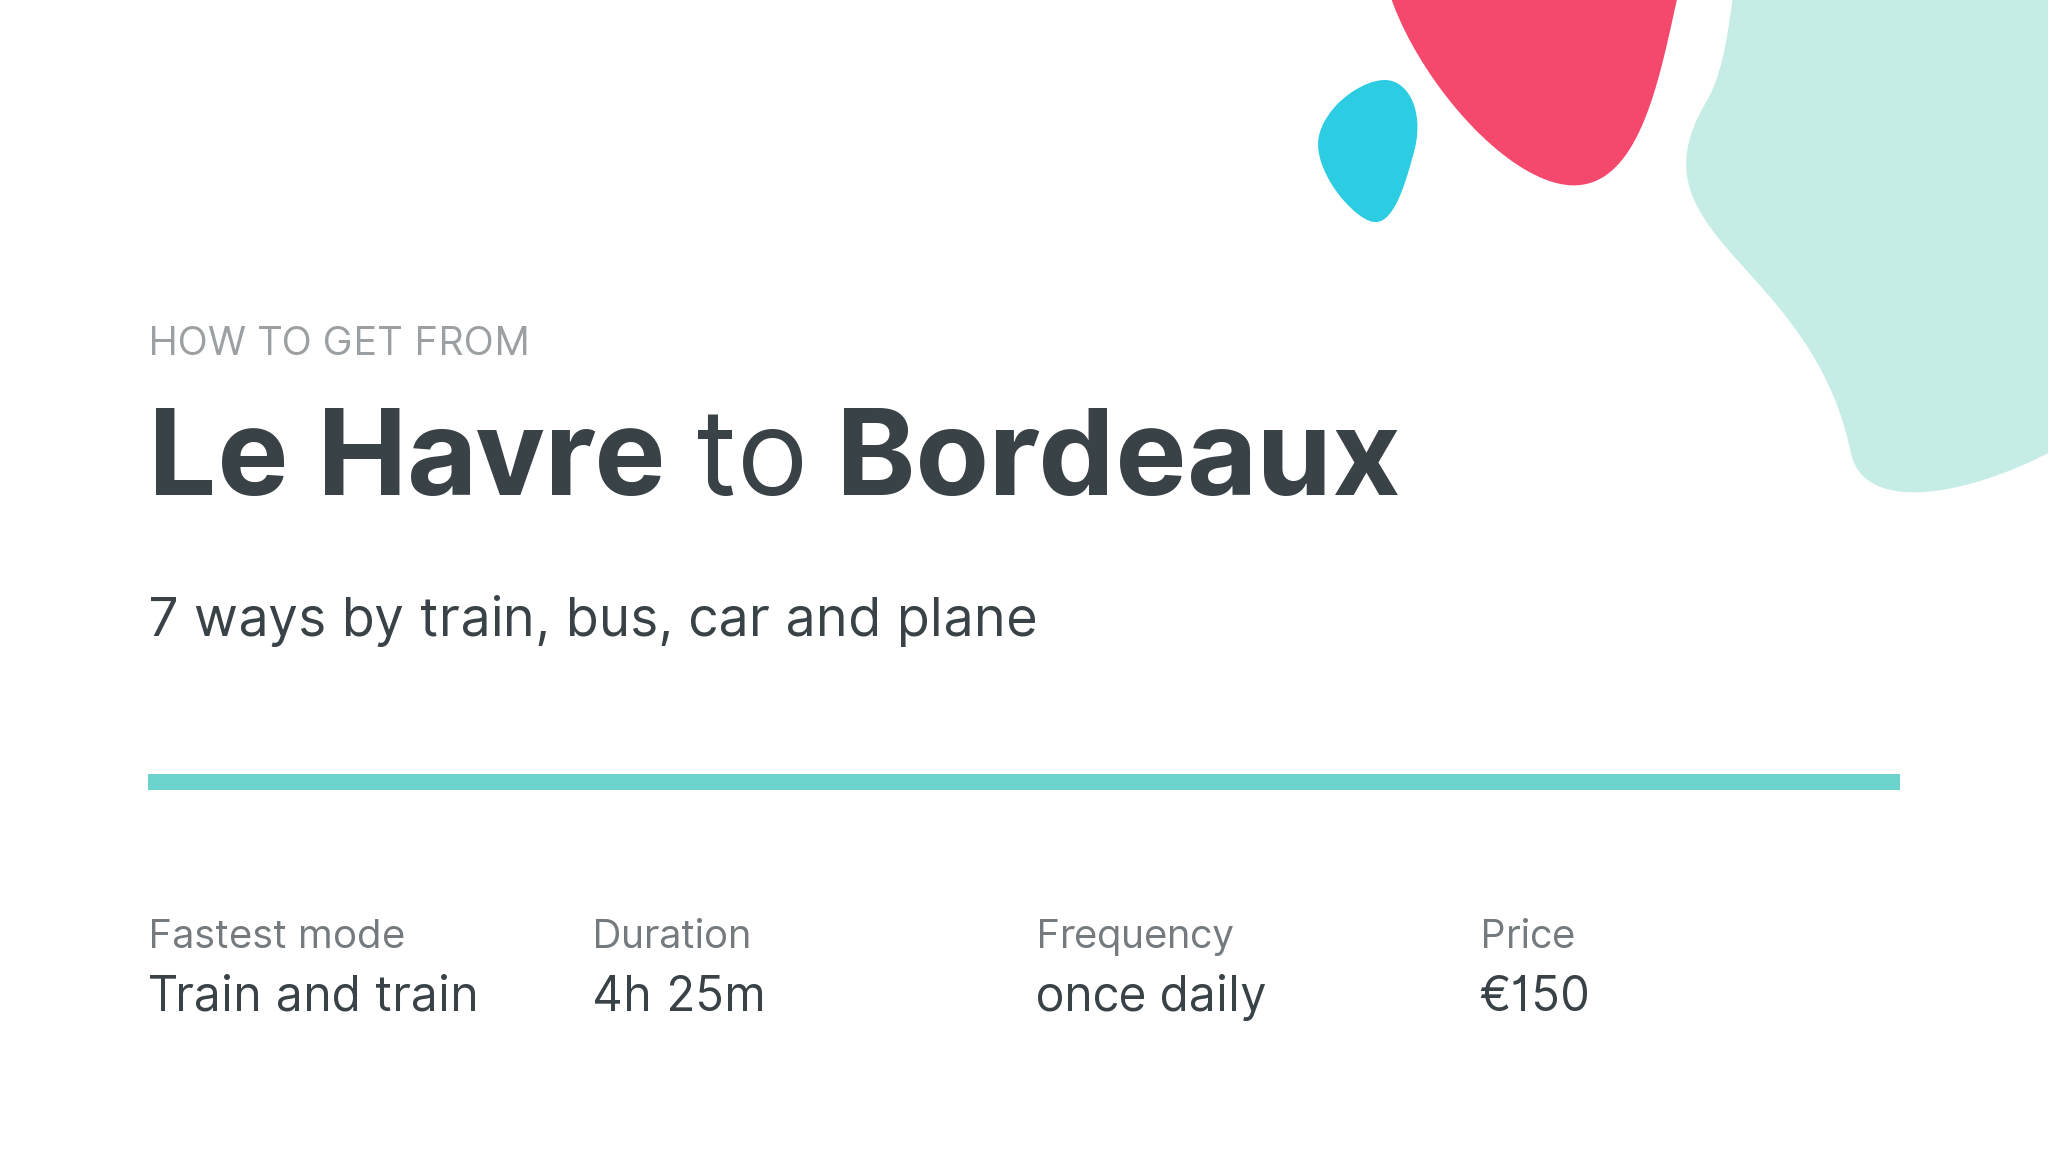 How do I get from Le Havre to Bordeaux